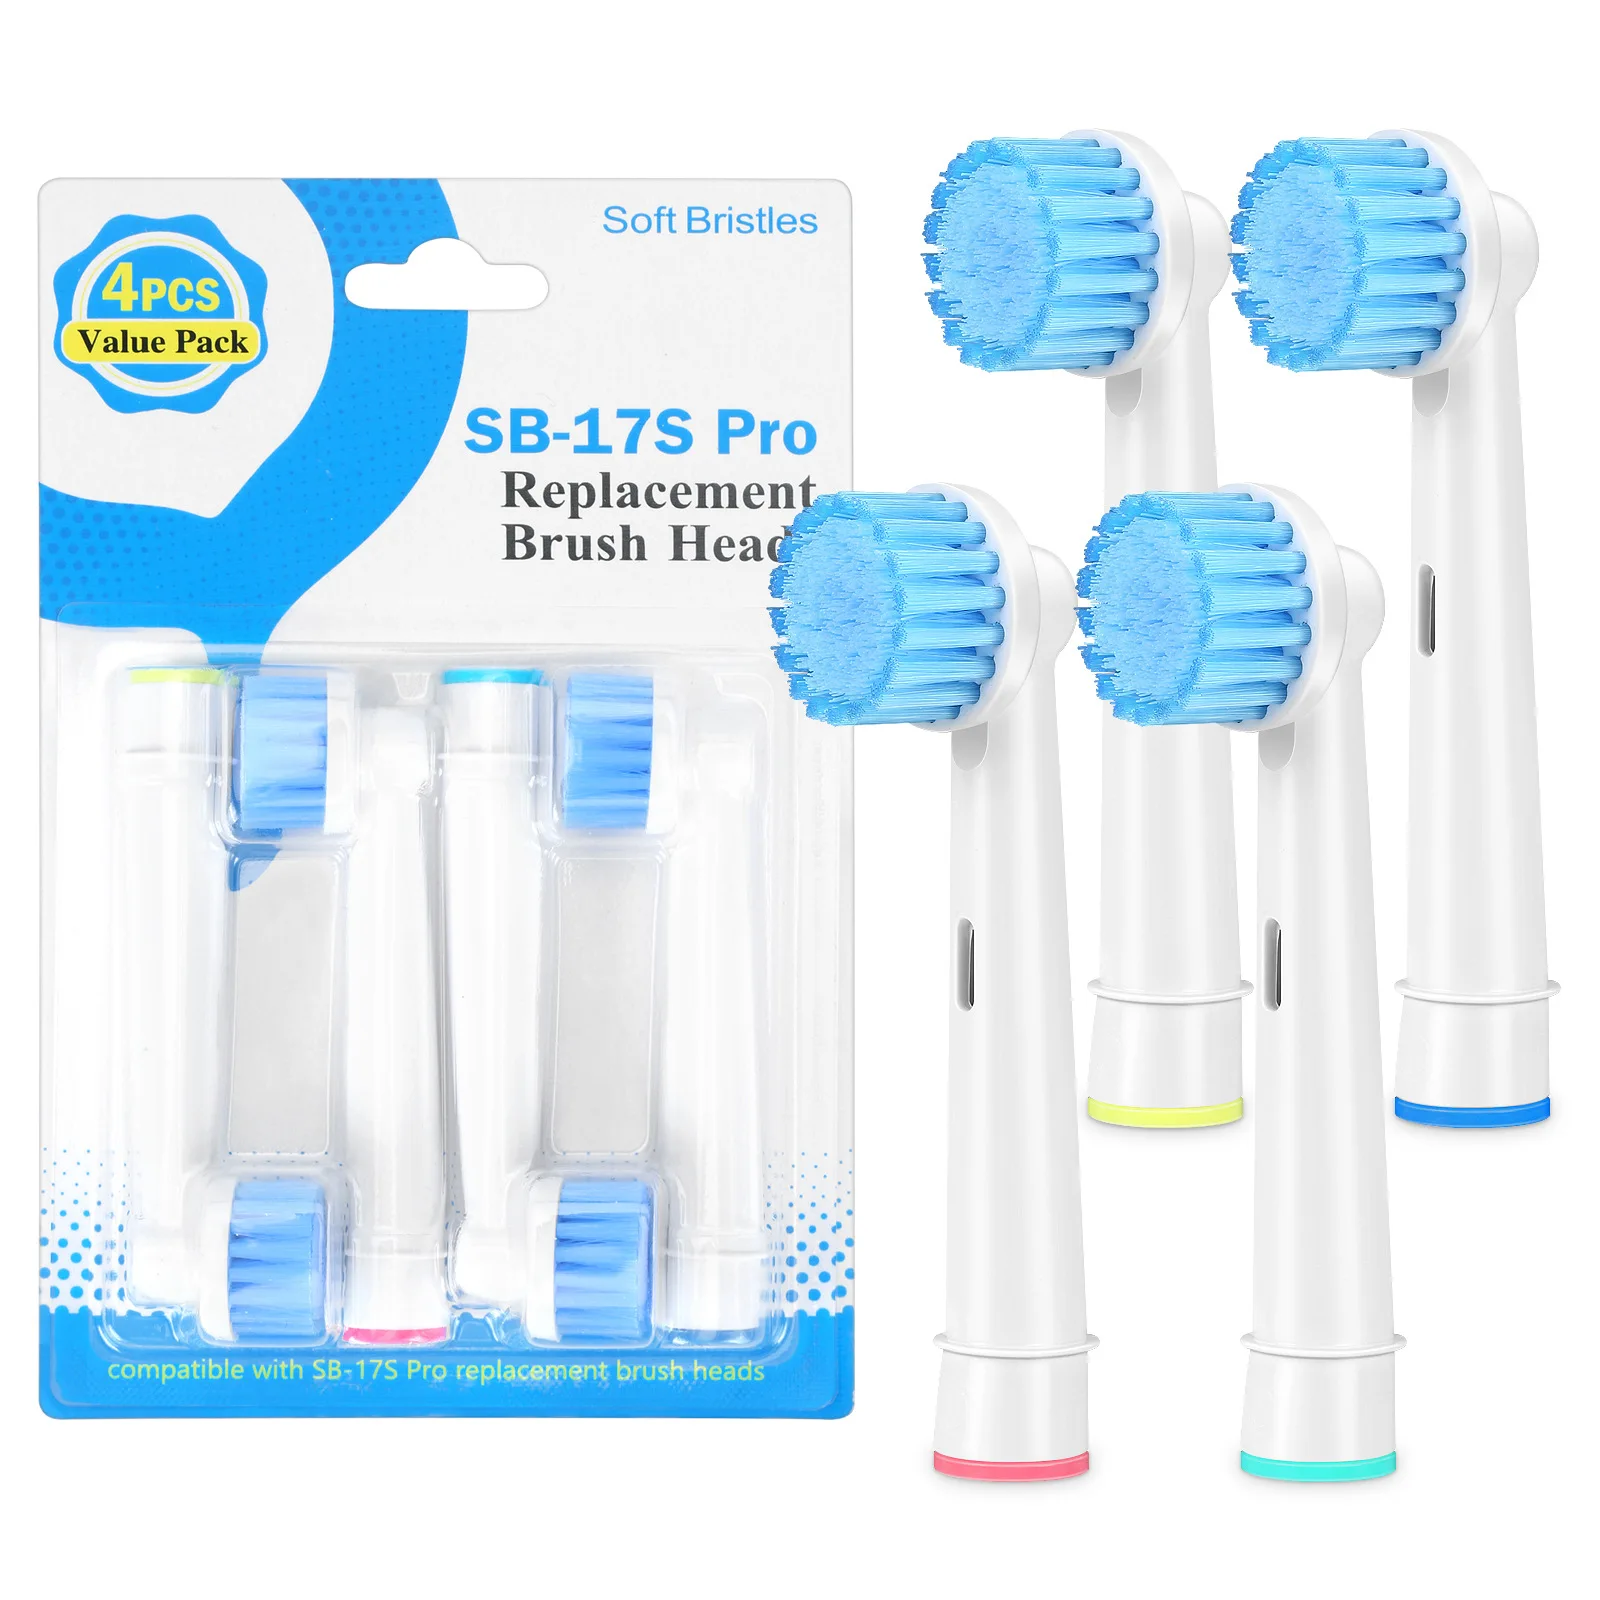 4 Pcs/Pack Replacement Brush Heads For Oral B Electric Toothbrush Head Soft Dupont Bristle Teeth Cleaning & Whitening Brush Head 4 8 12 16 pcs replacement brush heads for oral b electric toothbrush replacement head soft dupont bristle tooth brush heads